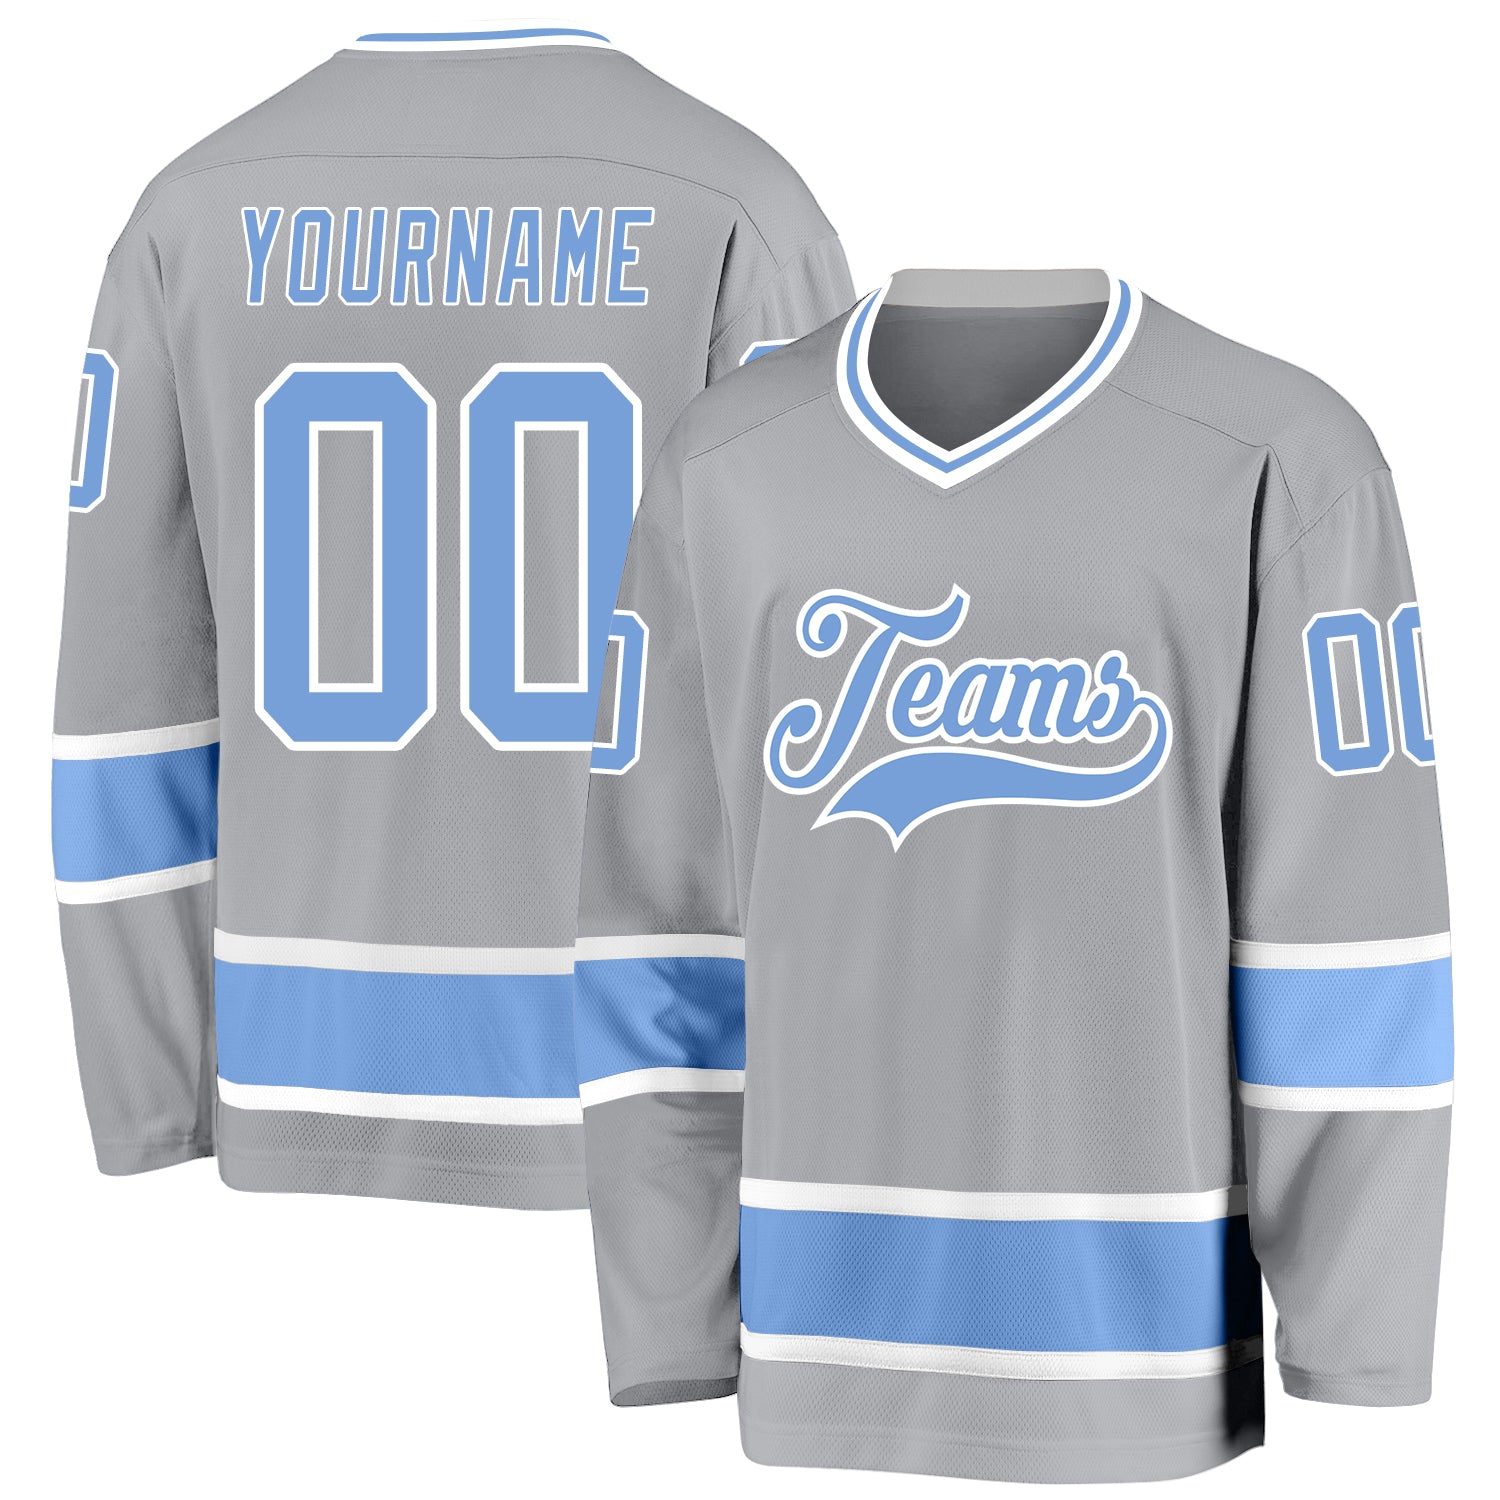 Blue Red White Sublimated Custom Blank Team Hockey Jerseys | YoungSpeeds